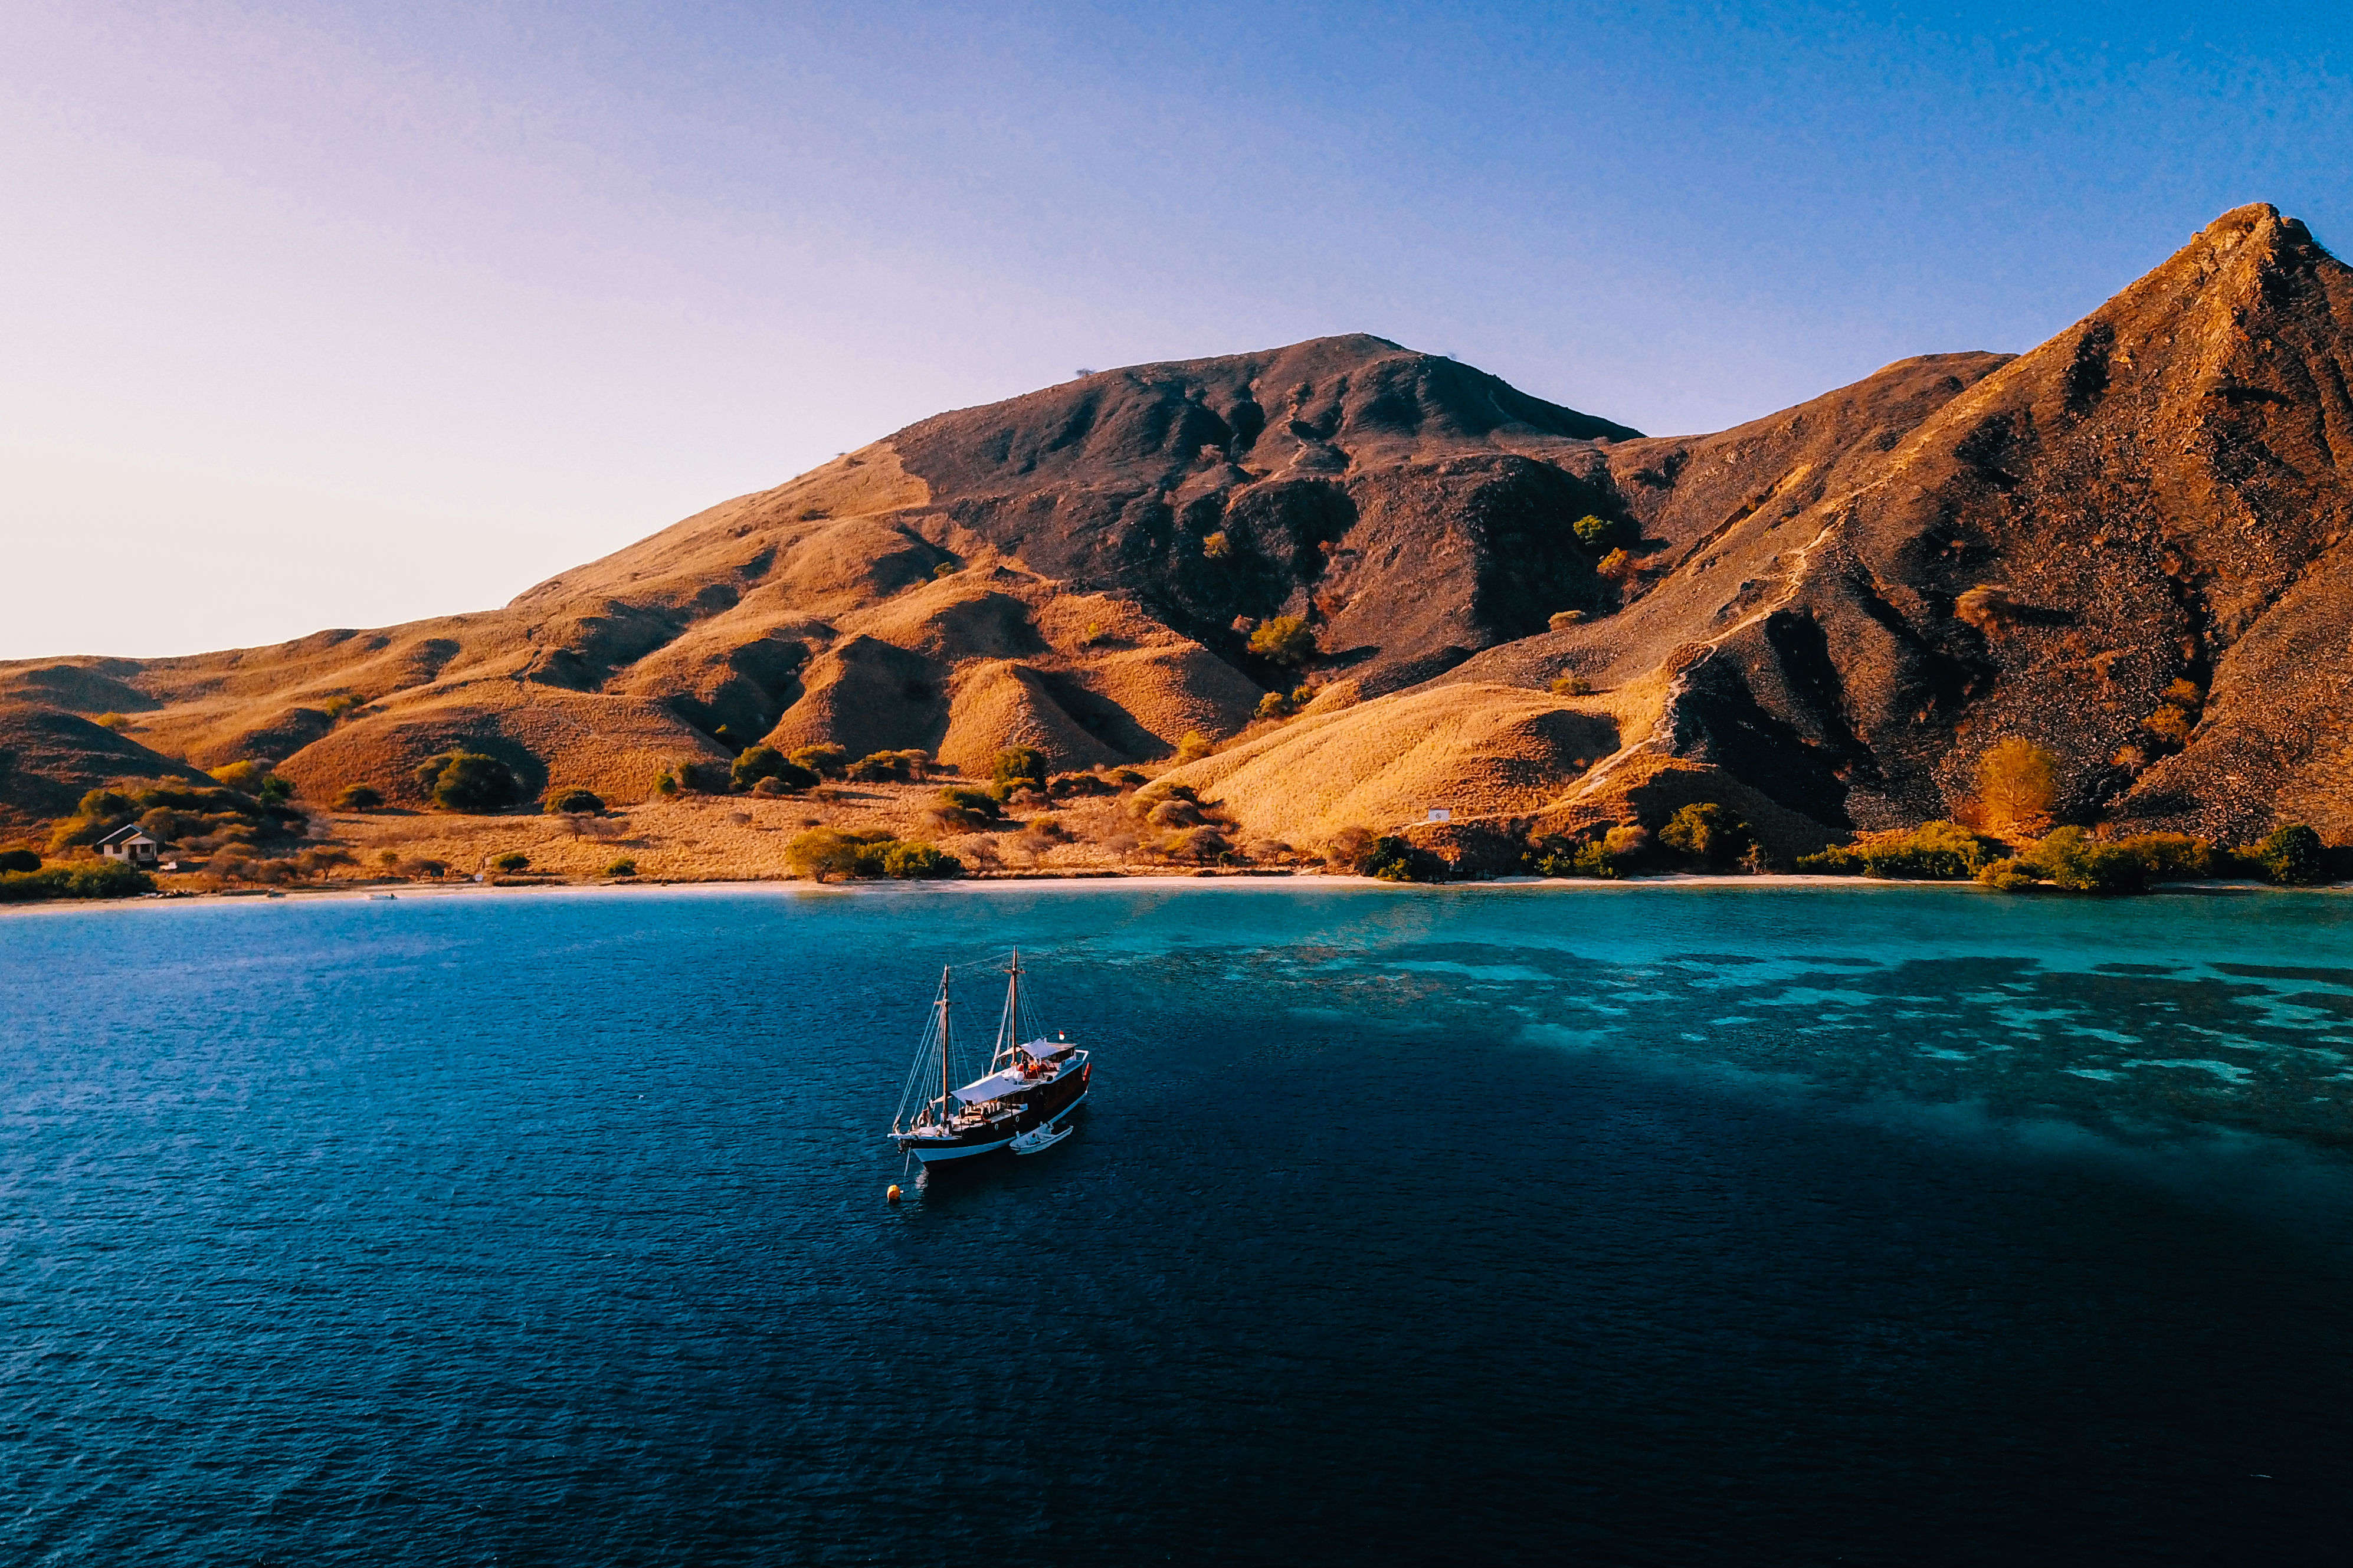 Komodo Island in Indonesia is going to be shut for a year